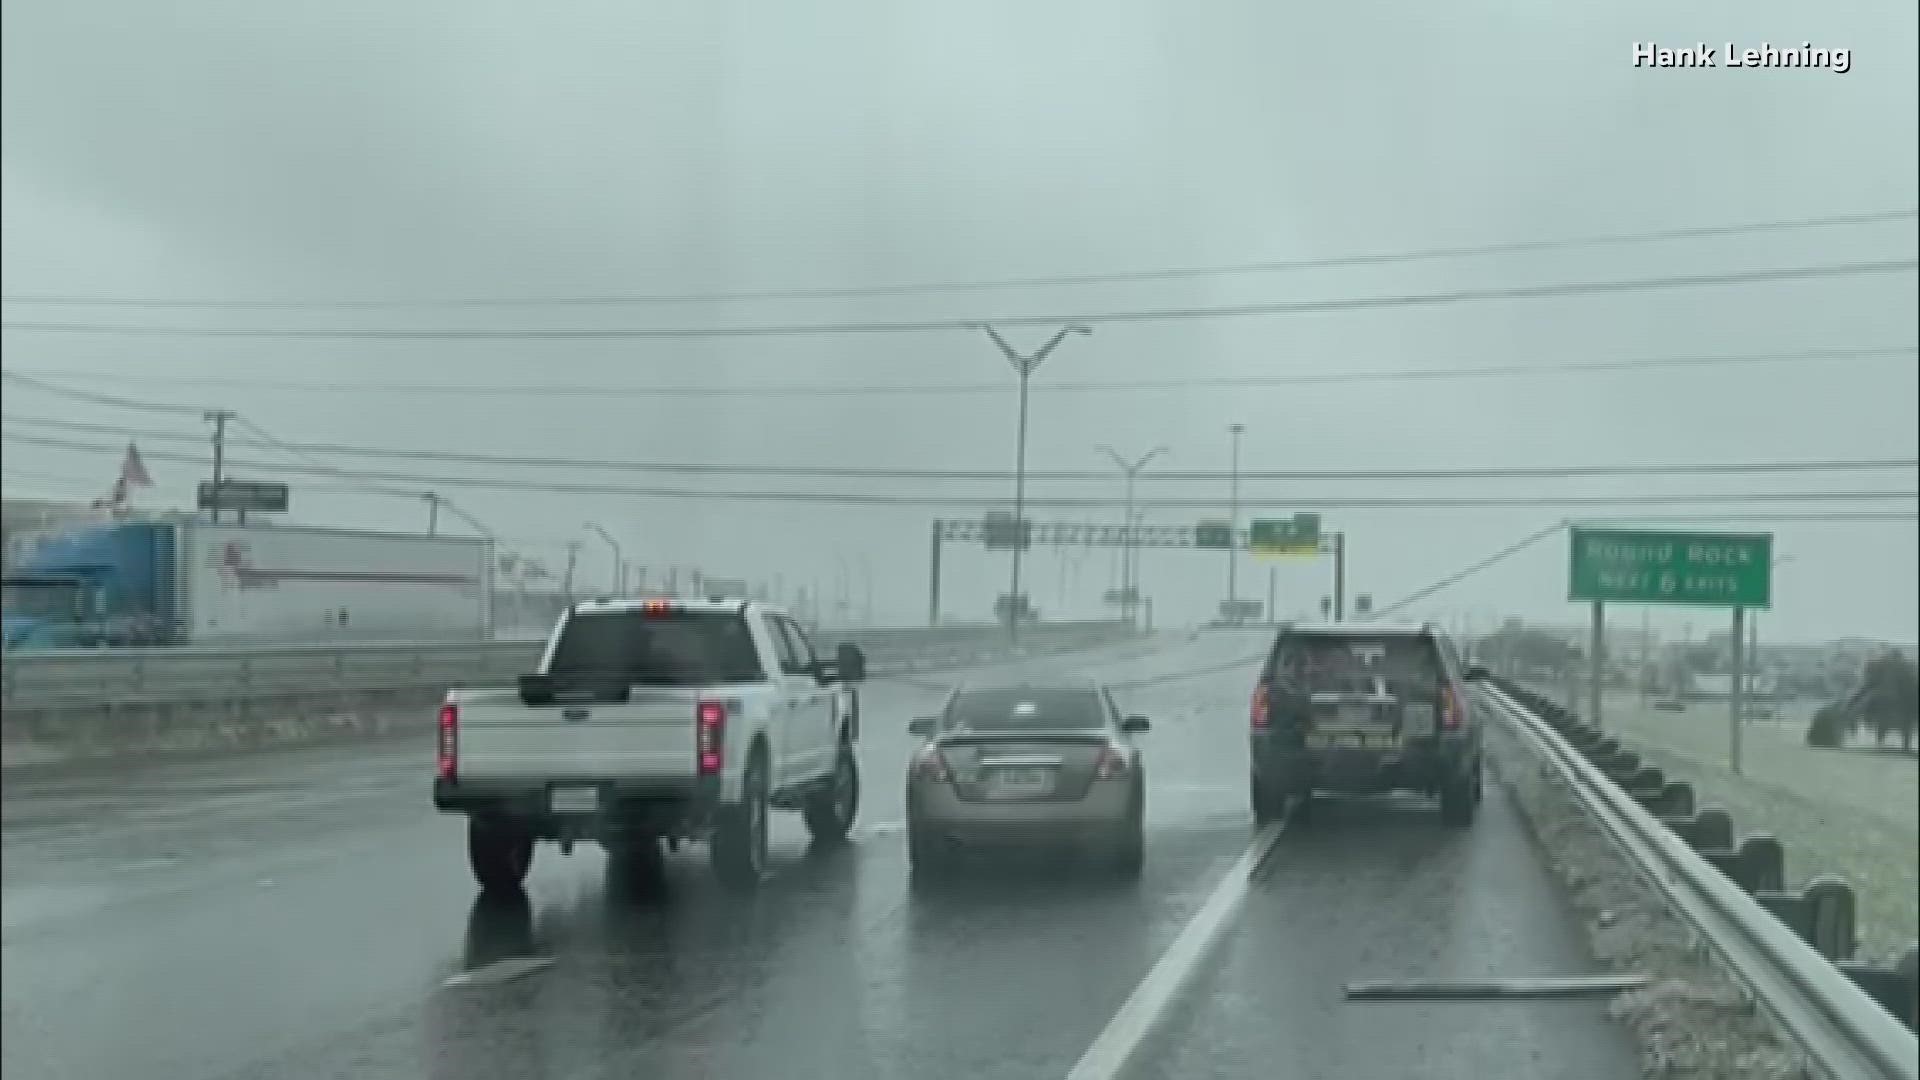 Viewer Hank Lehning shared video while pulled over on the freeway, showing a downed powerline across Interstate 35 north of Austin.